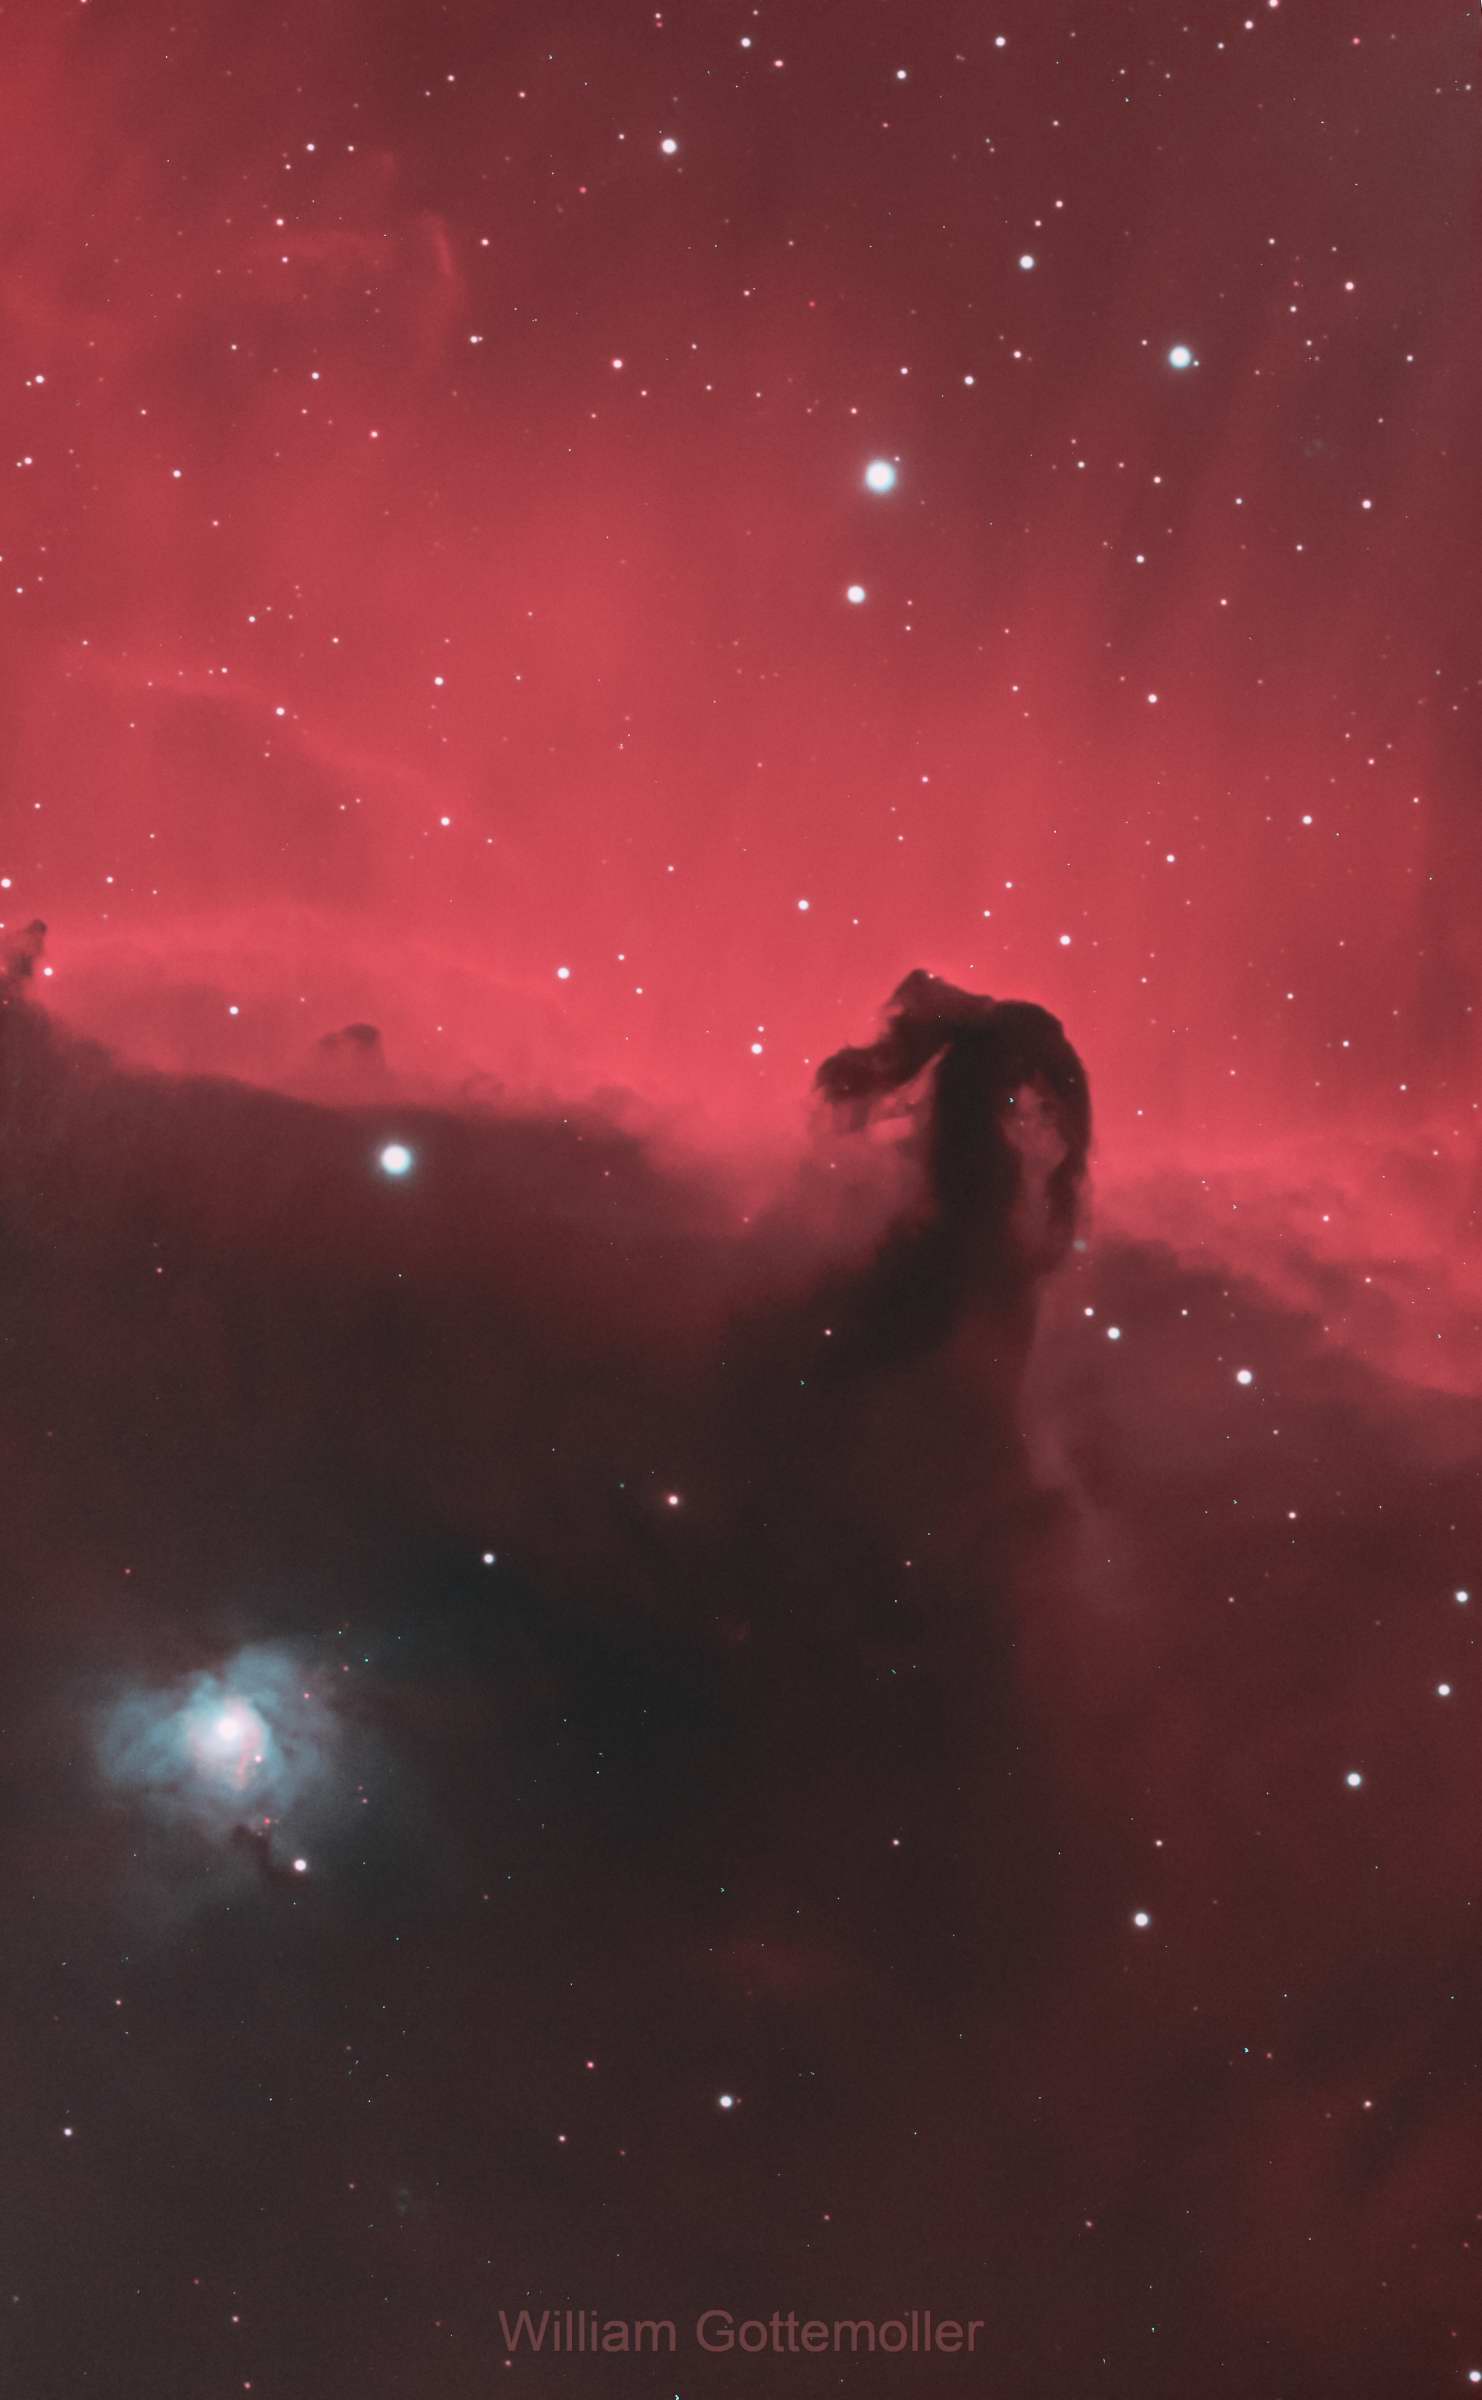 Horsehead Nebula (IC 434) and Reflection Nebula NGC 2023 in HOO by William Gottemoller 